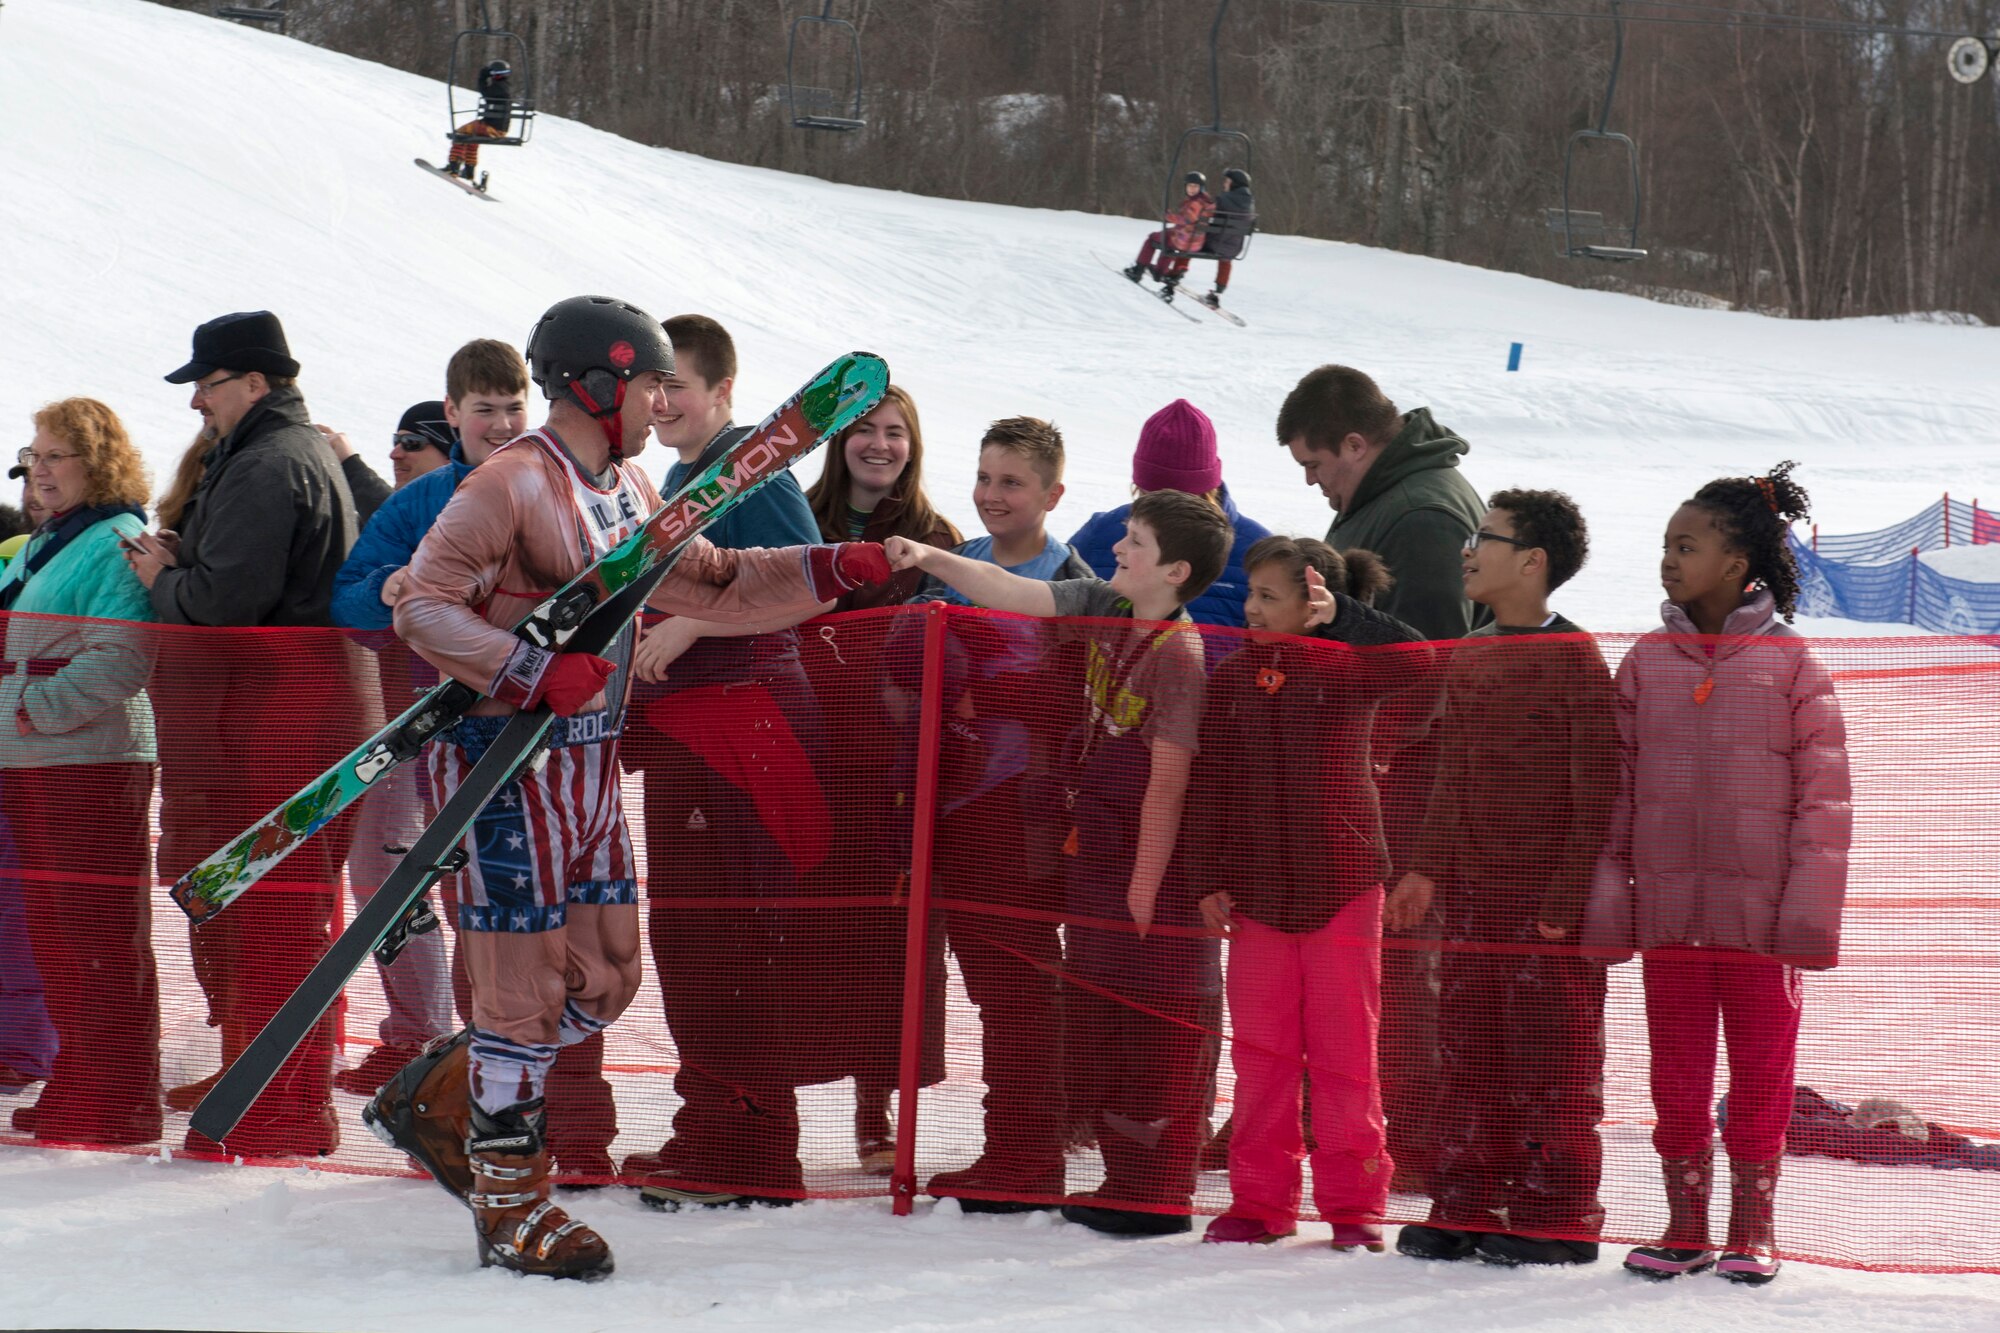 John Androski, a participant of the 2018 Slush Cup, interacts with the crowd after completing his jump at Joint Base Elmendorf-Richardson’s Hillberg Ski Area, March 18, 2018. The Slush Cup is a two-fold annual event celebrating the change in weather, consisting of skiers and snowboarders trying to make it across a man-made slush pond without falling.